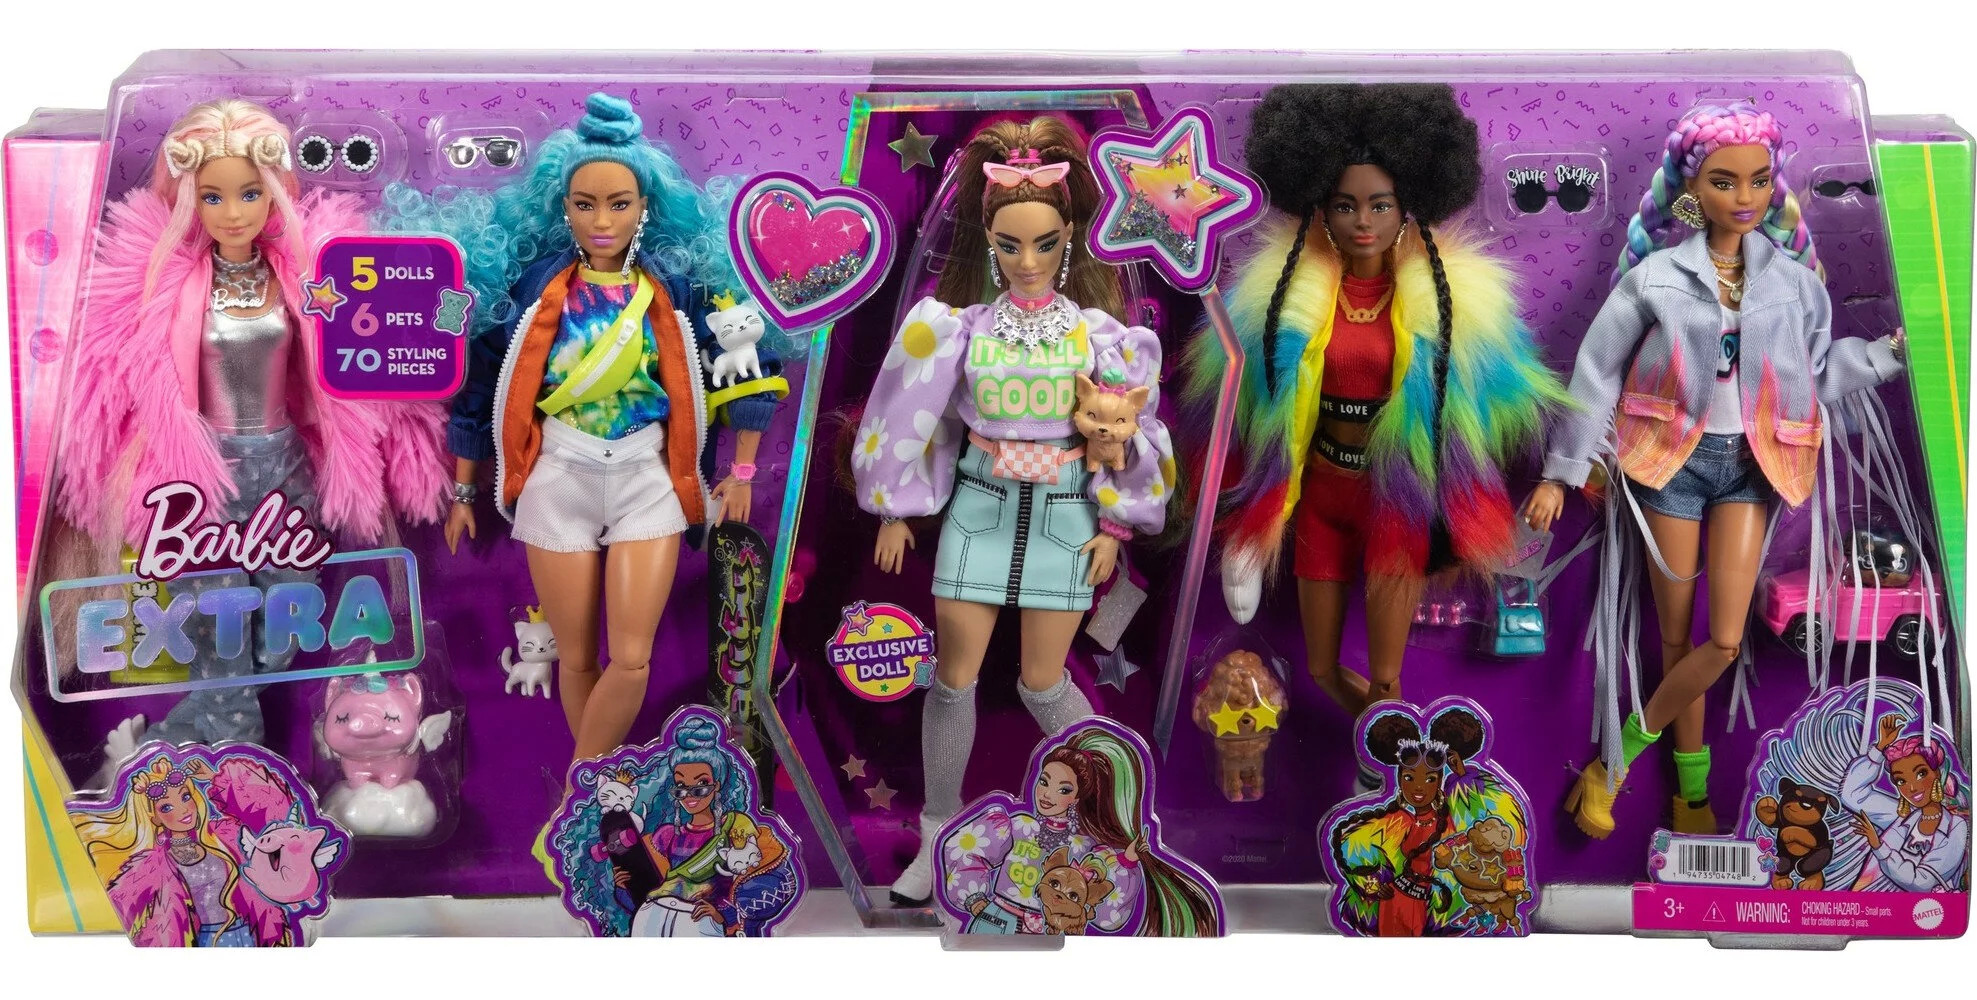 Barbie Extra 5-Doll Set with 6 Pets & 70 Styling Pieces $49 + Free Shipping